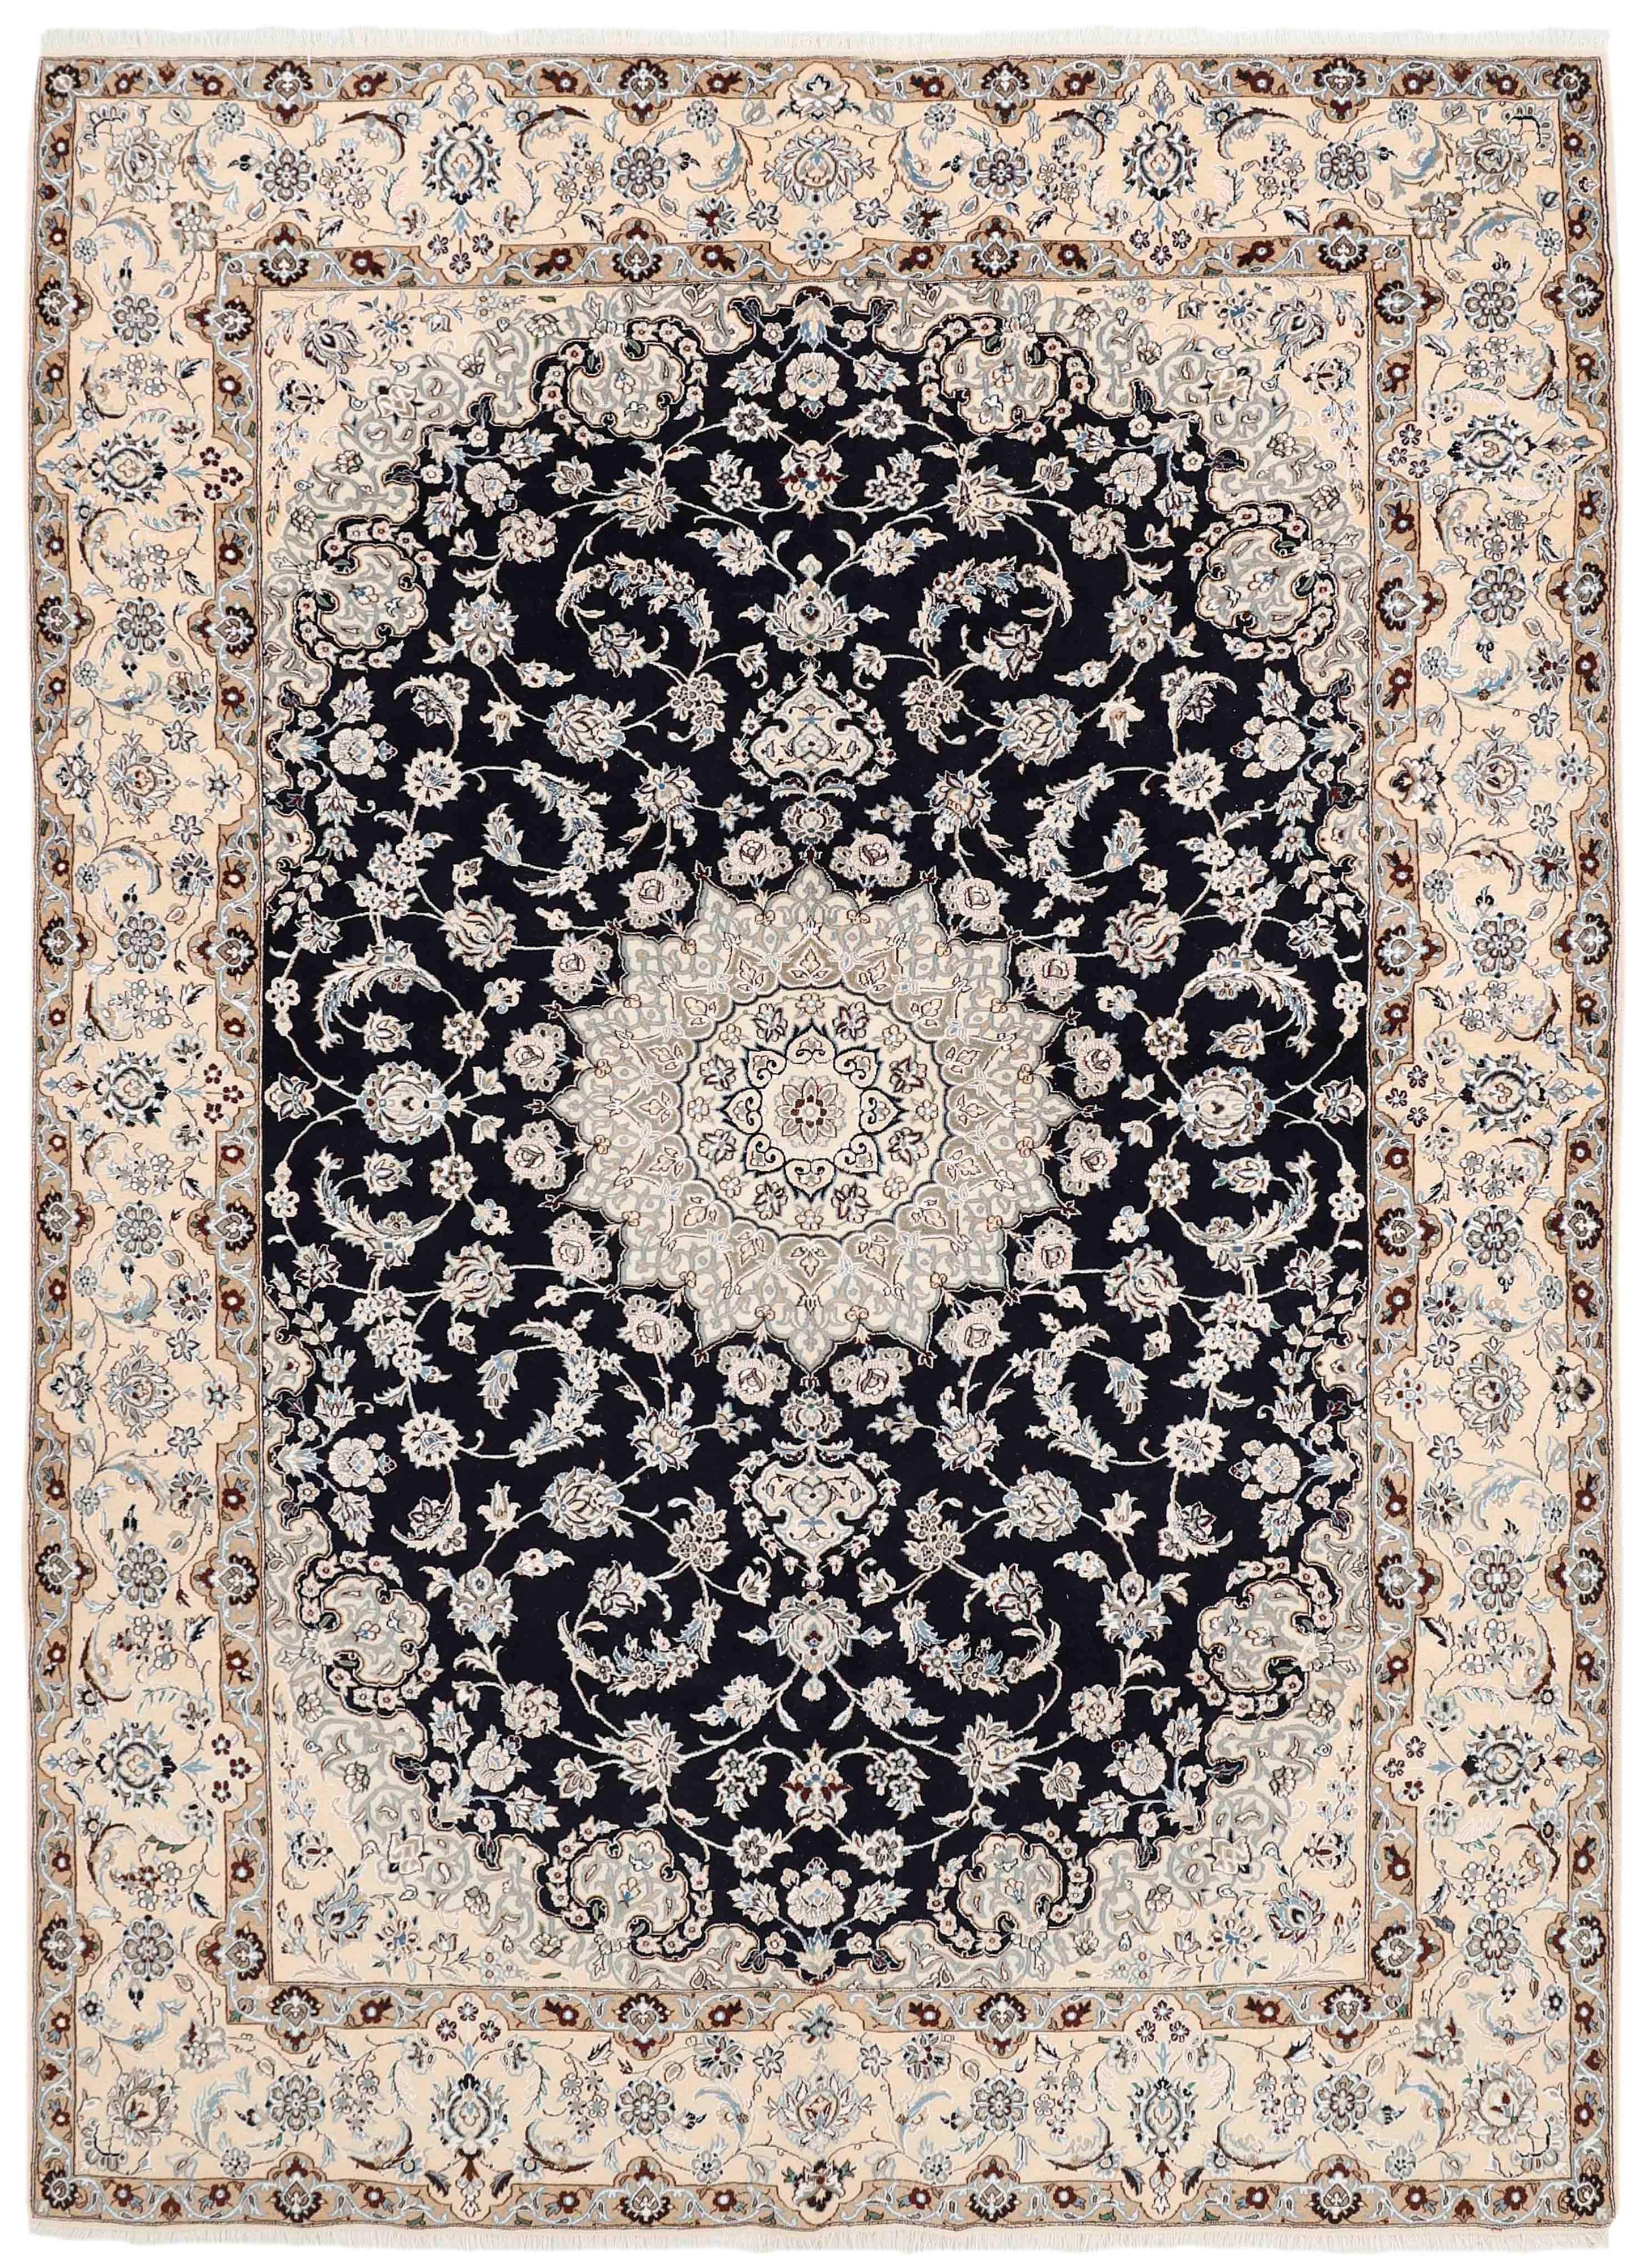 Authentic oriental rug with traditional floral design in black